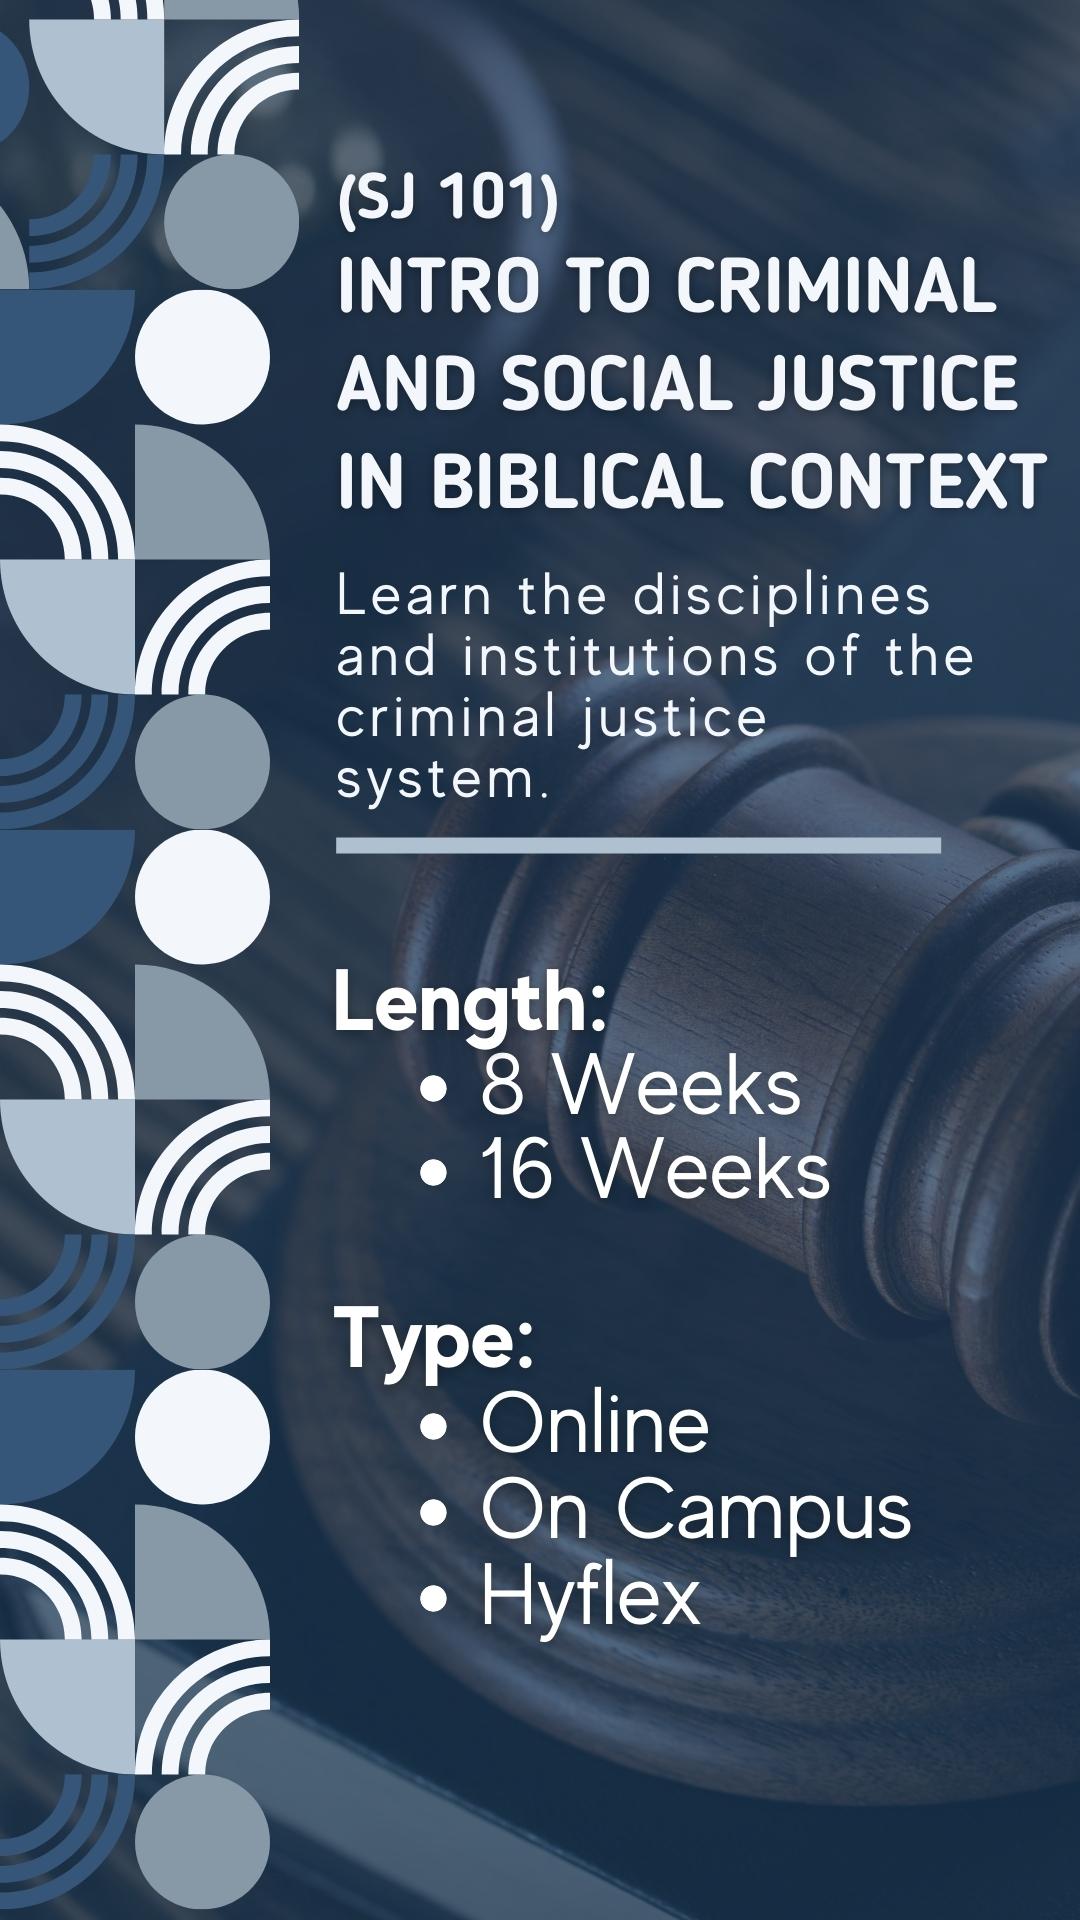 Intro to Criminal and Social Justice in Biblical Context